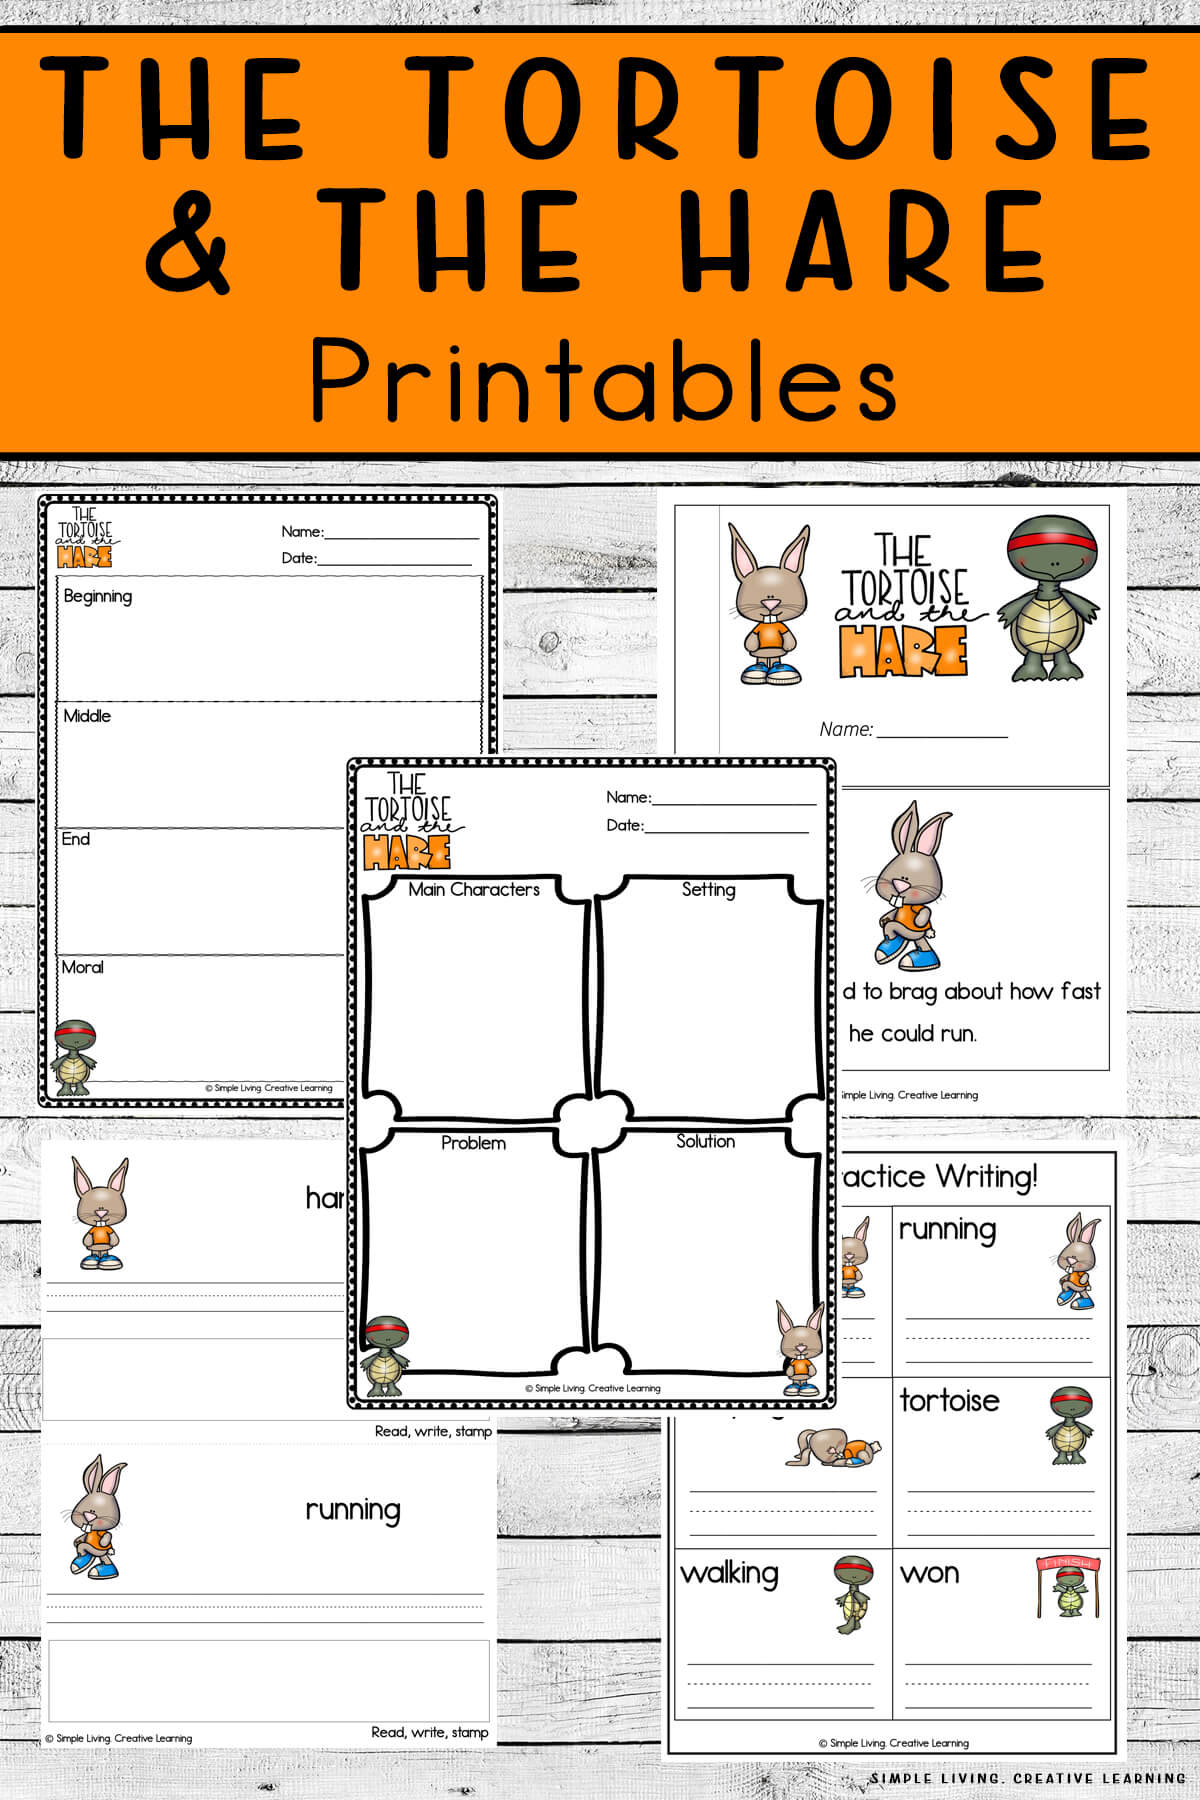 Aesops fables printables the tortoise and the hare printables